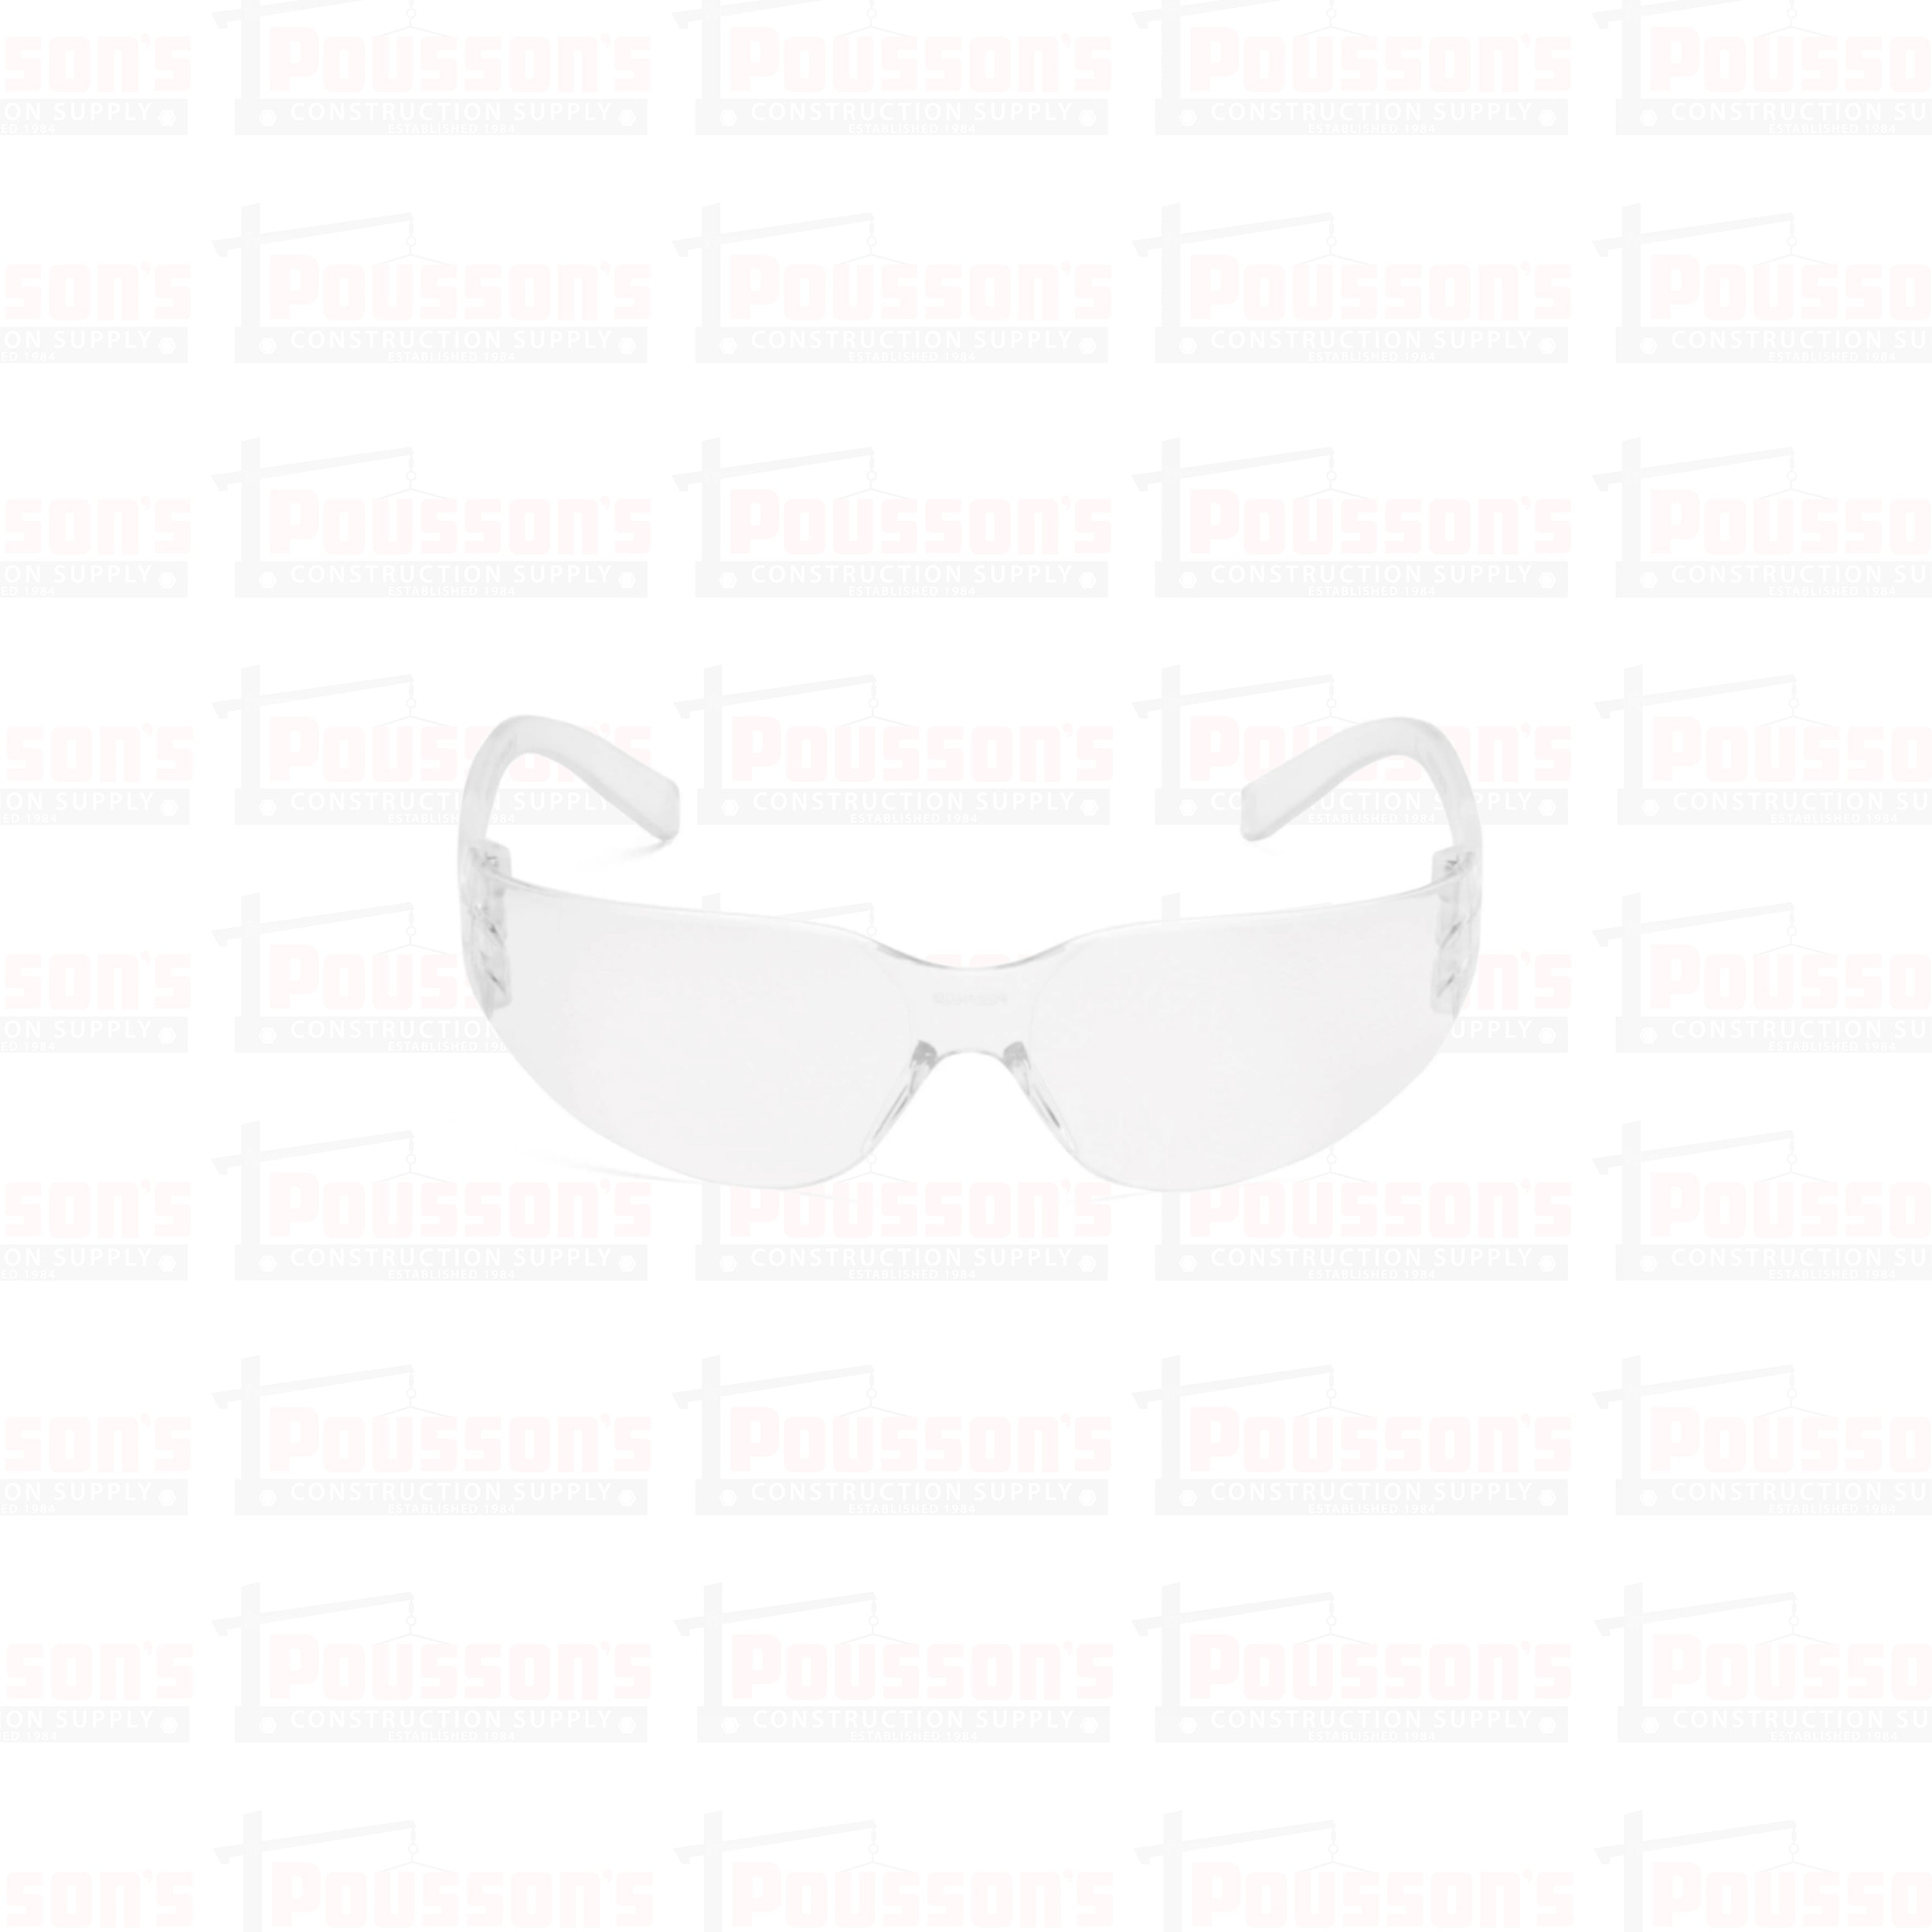 Pyramex Clear Safety Glasses (12 Pack)